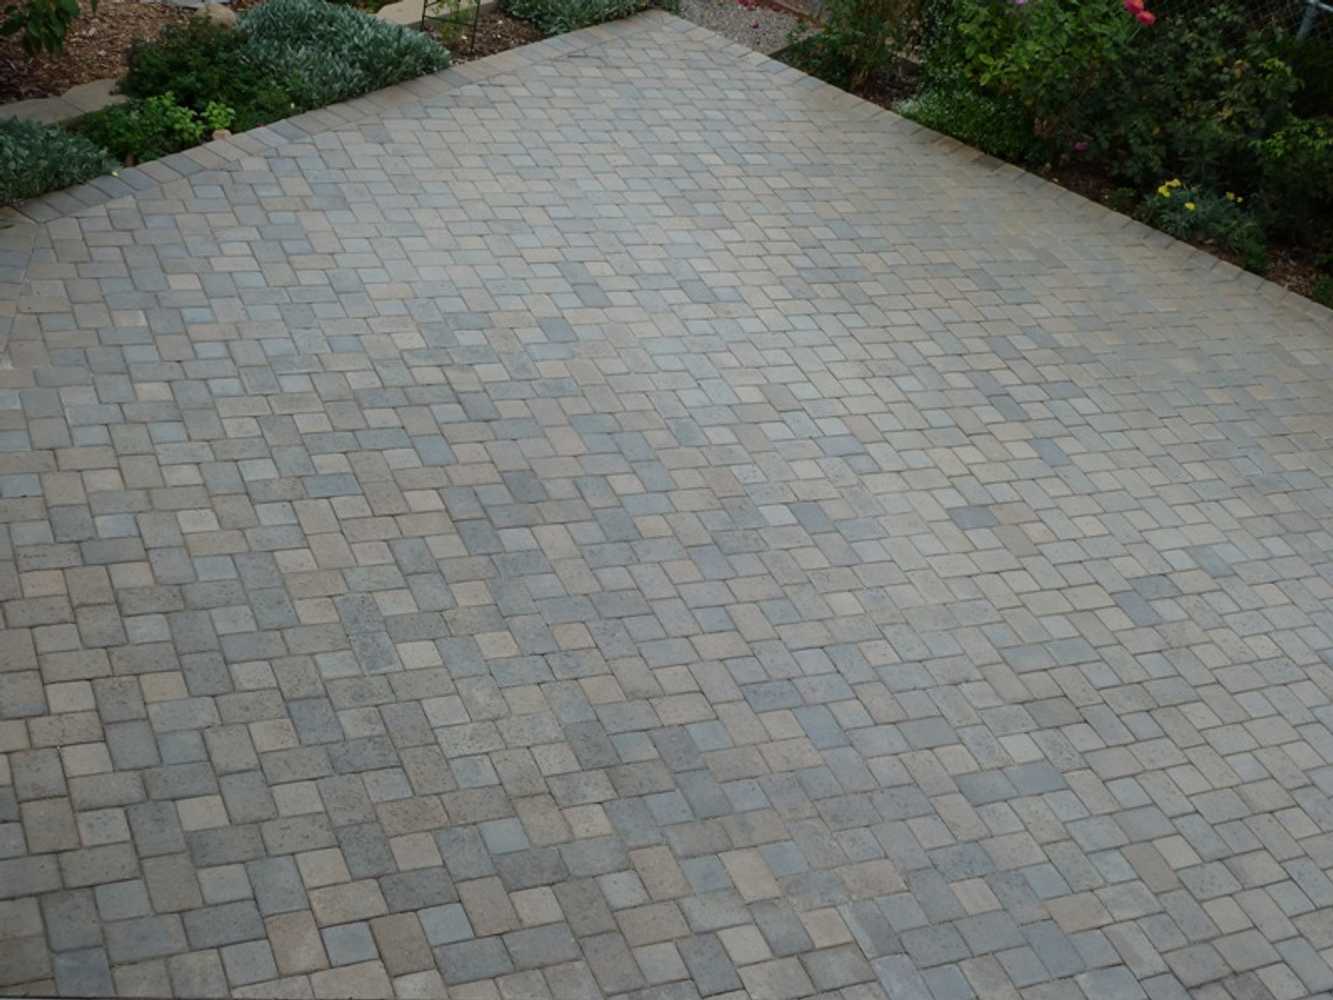 Paver Brick driveway in San Diego County